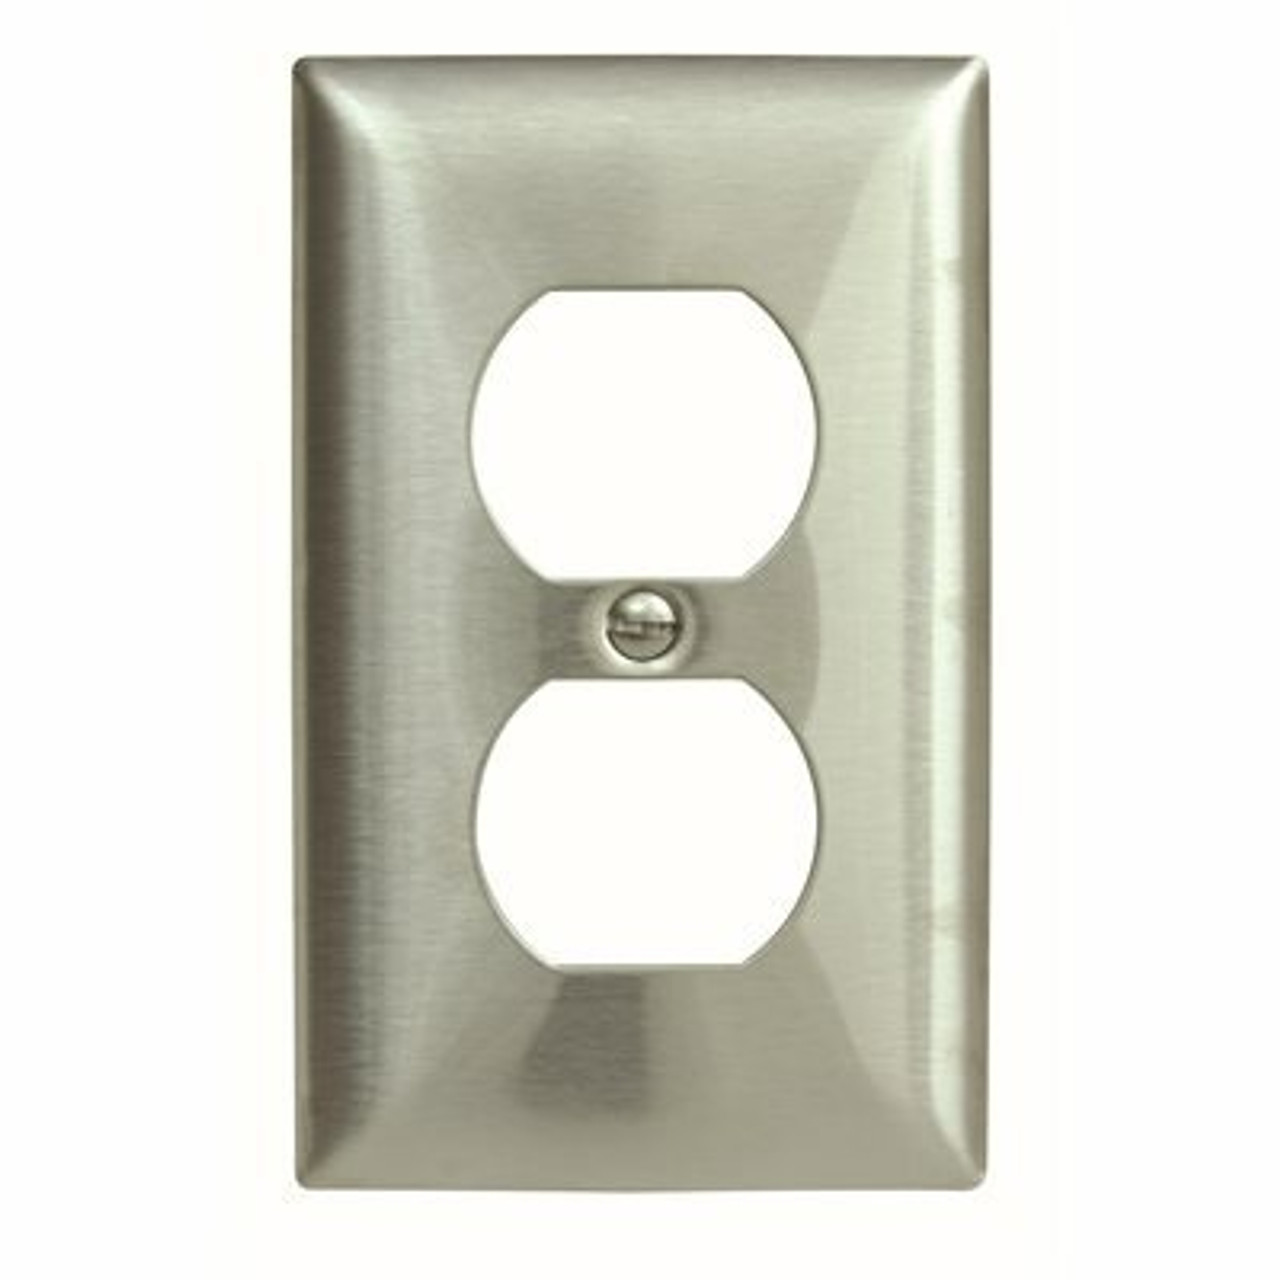 Hubbell Wiring 1-Gang Duplex Wall Plate, Stainless Steel